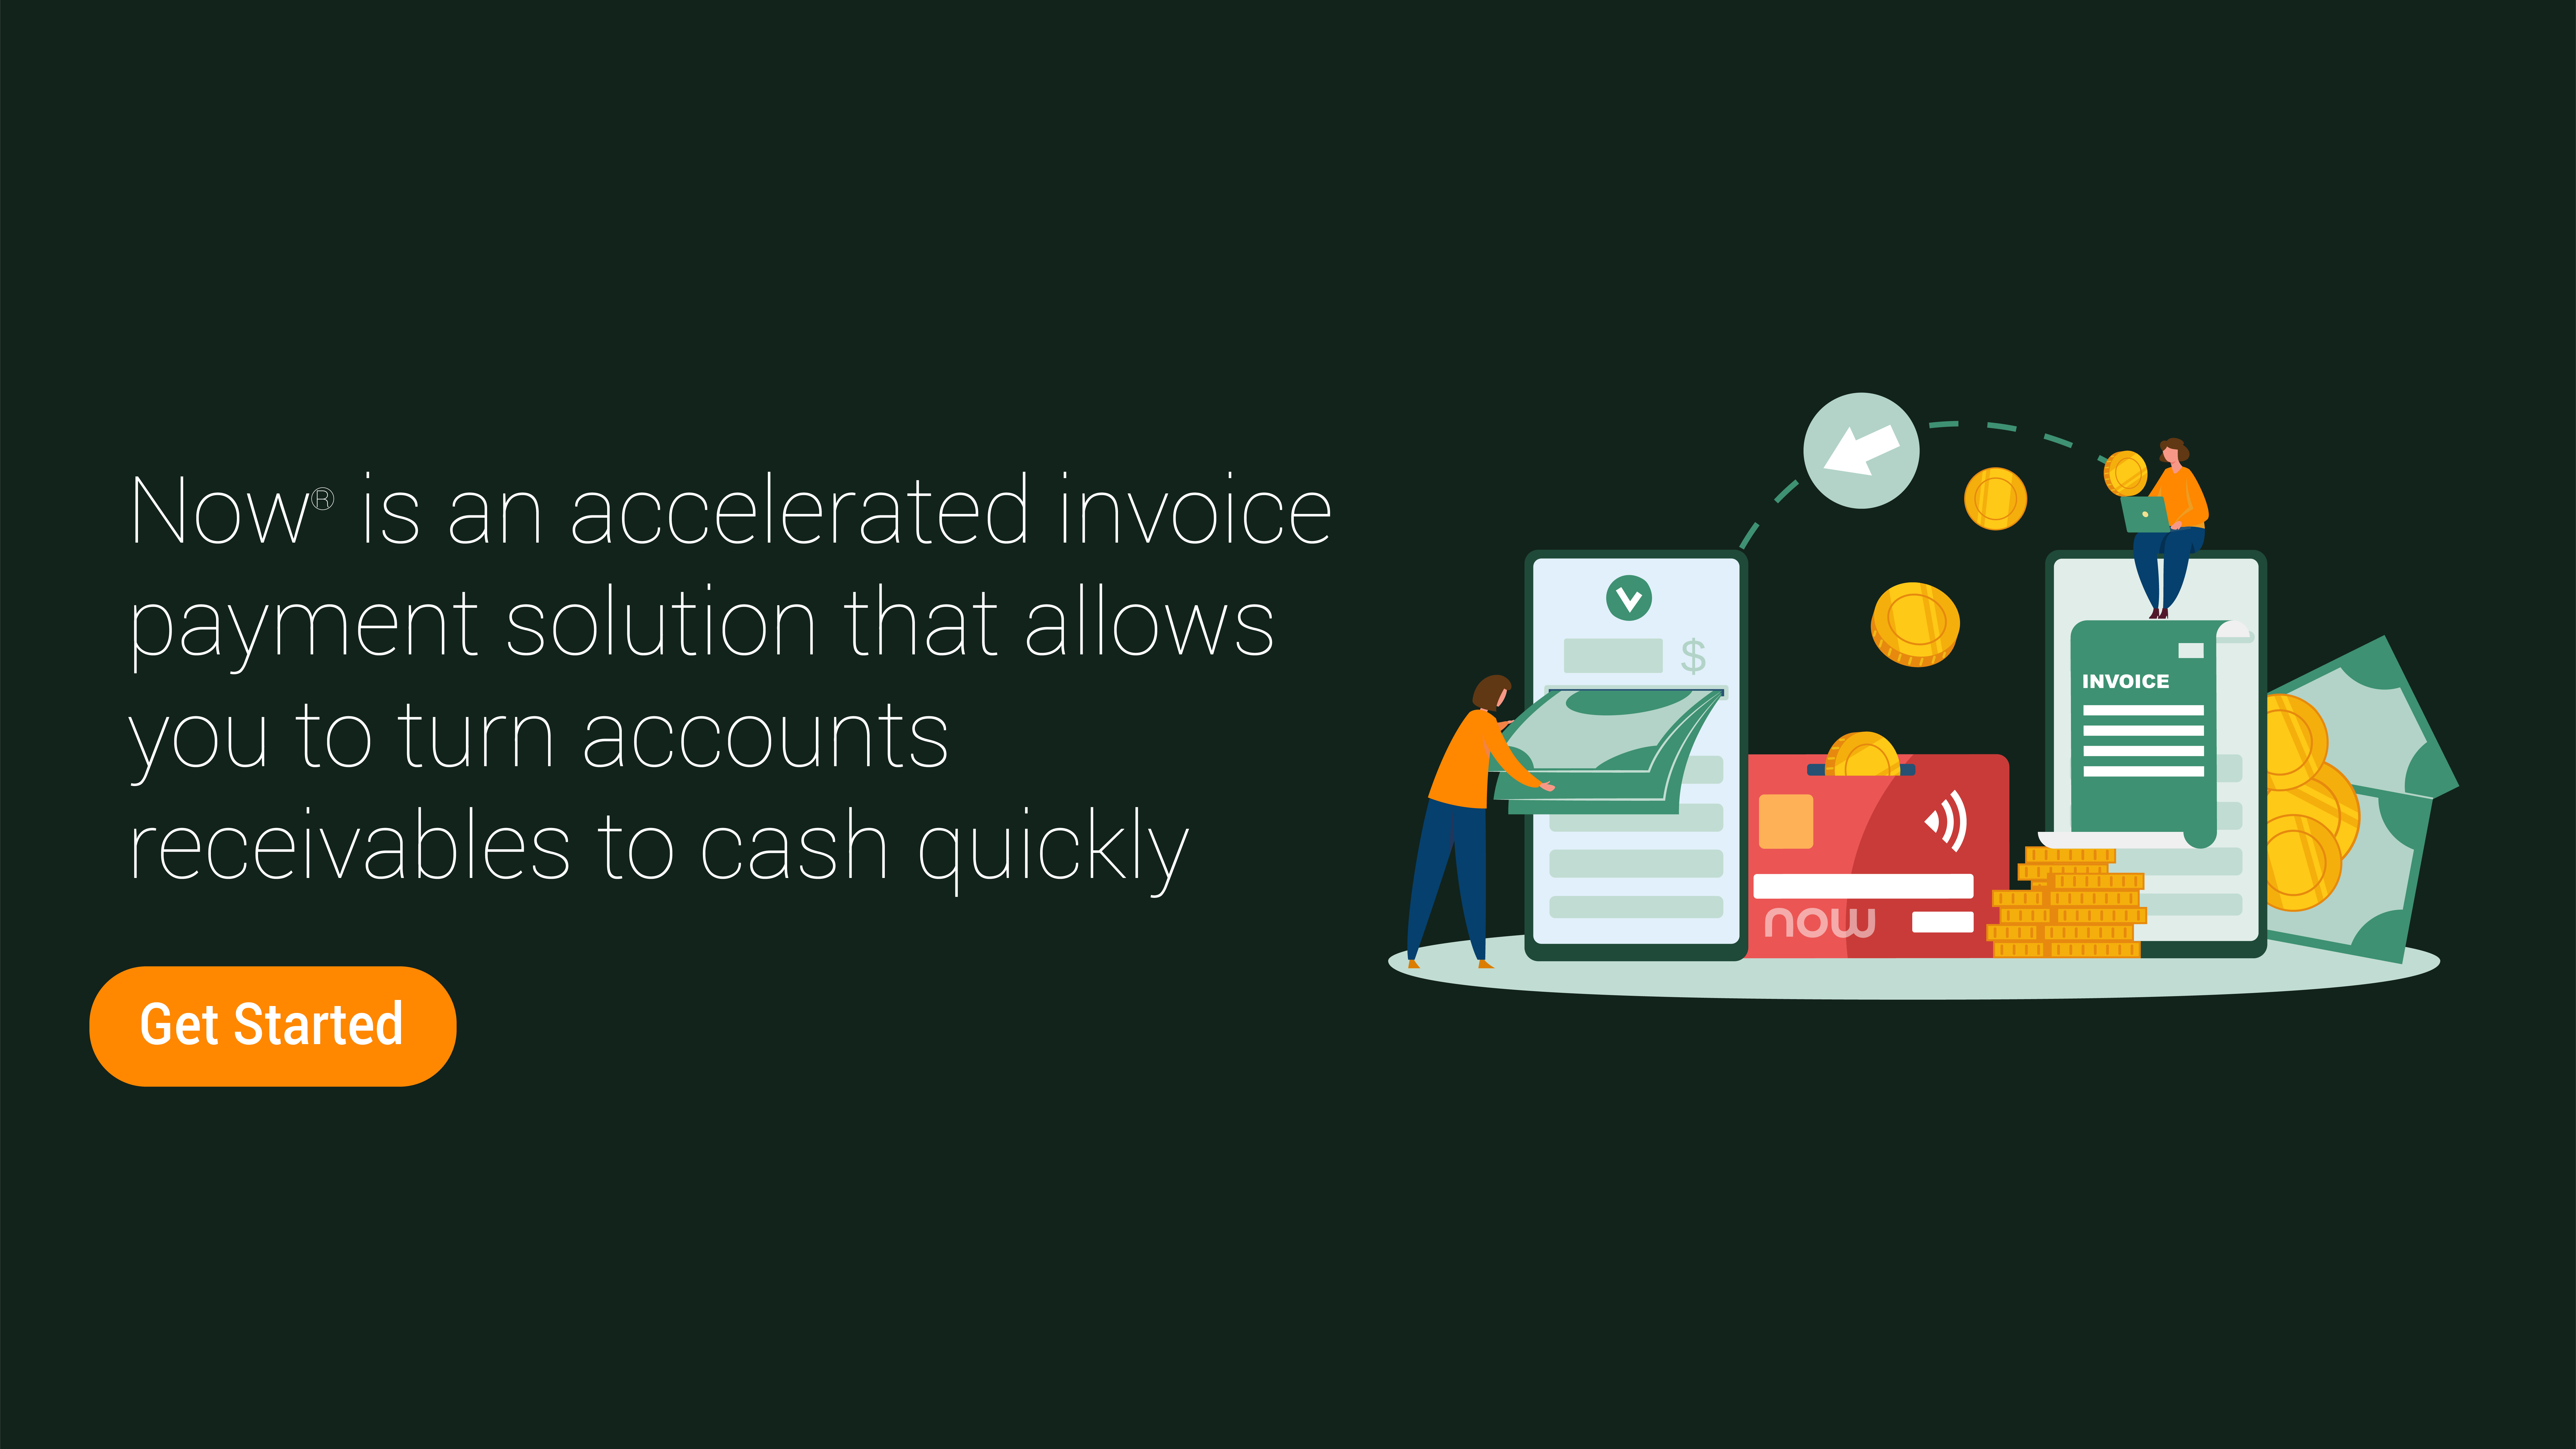 Accelerated invoice solution get started button